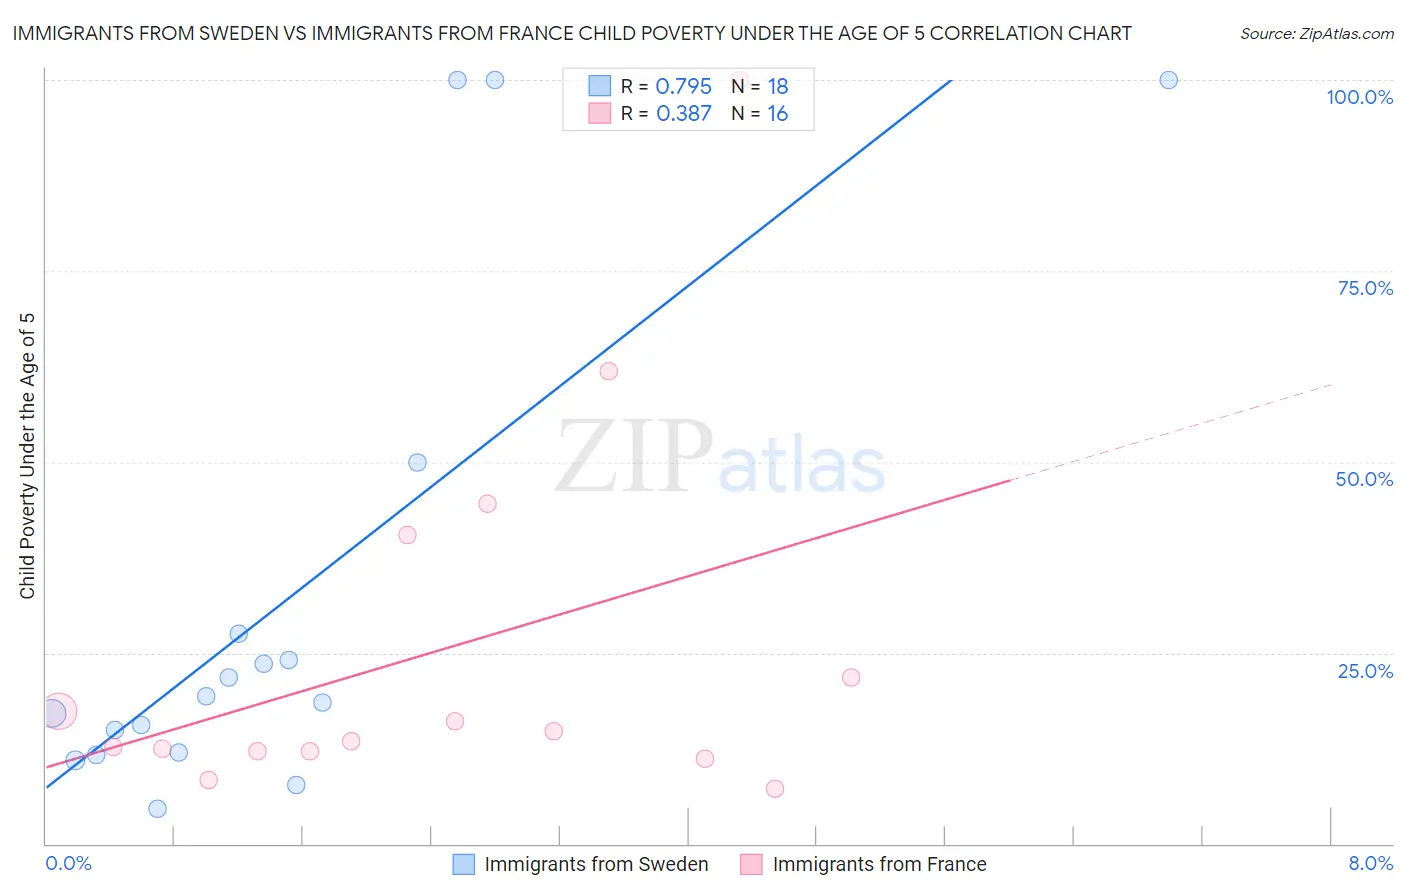 Immigrants from Sweden vs Immigrants from France Child Poverty Under the Age of 5